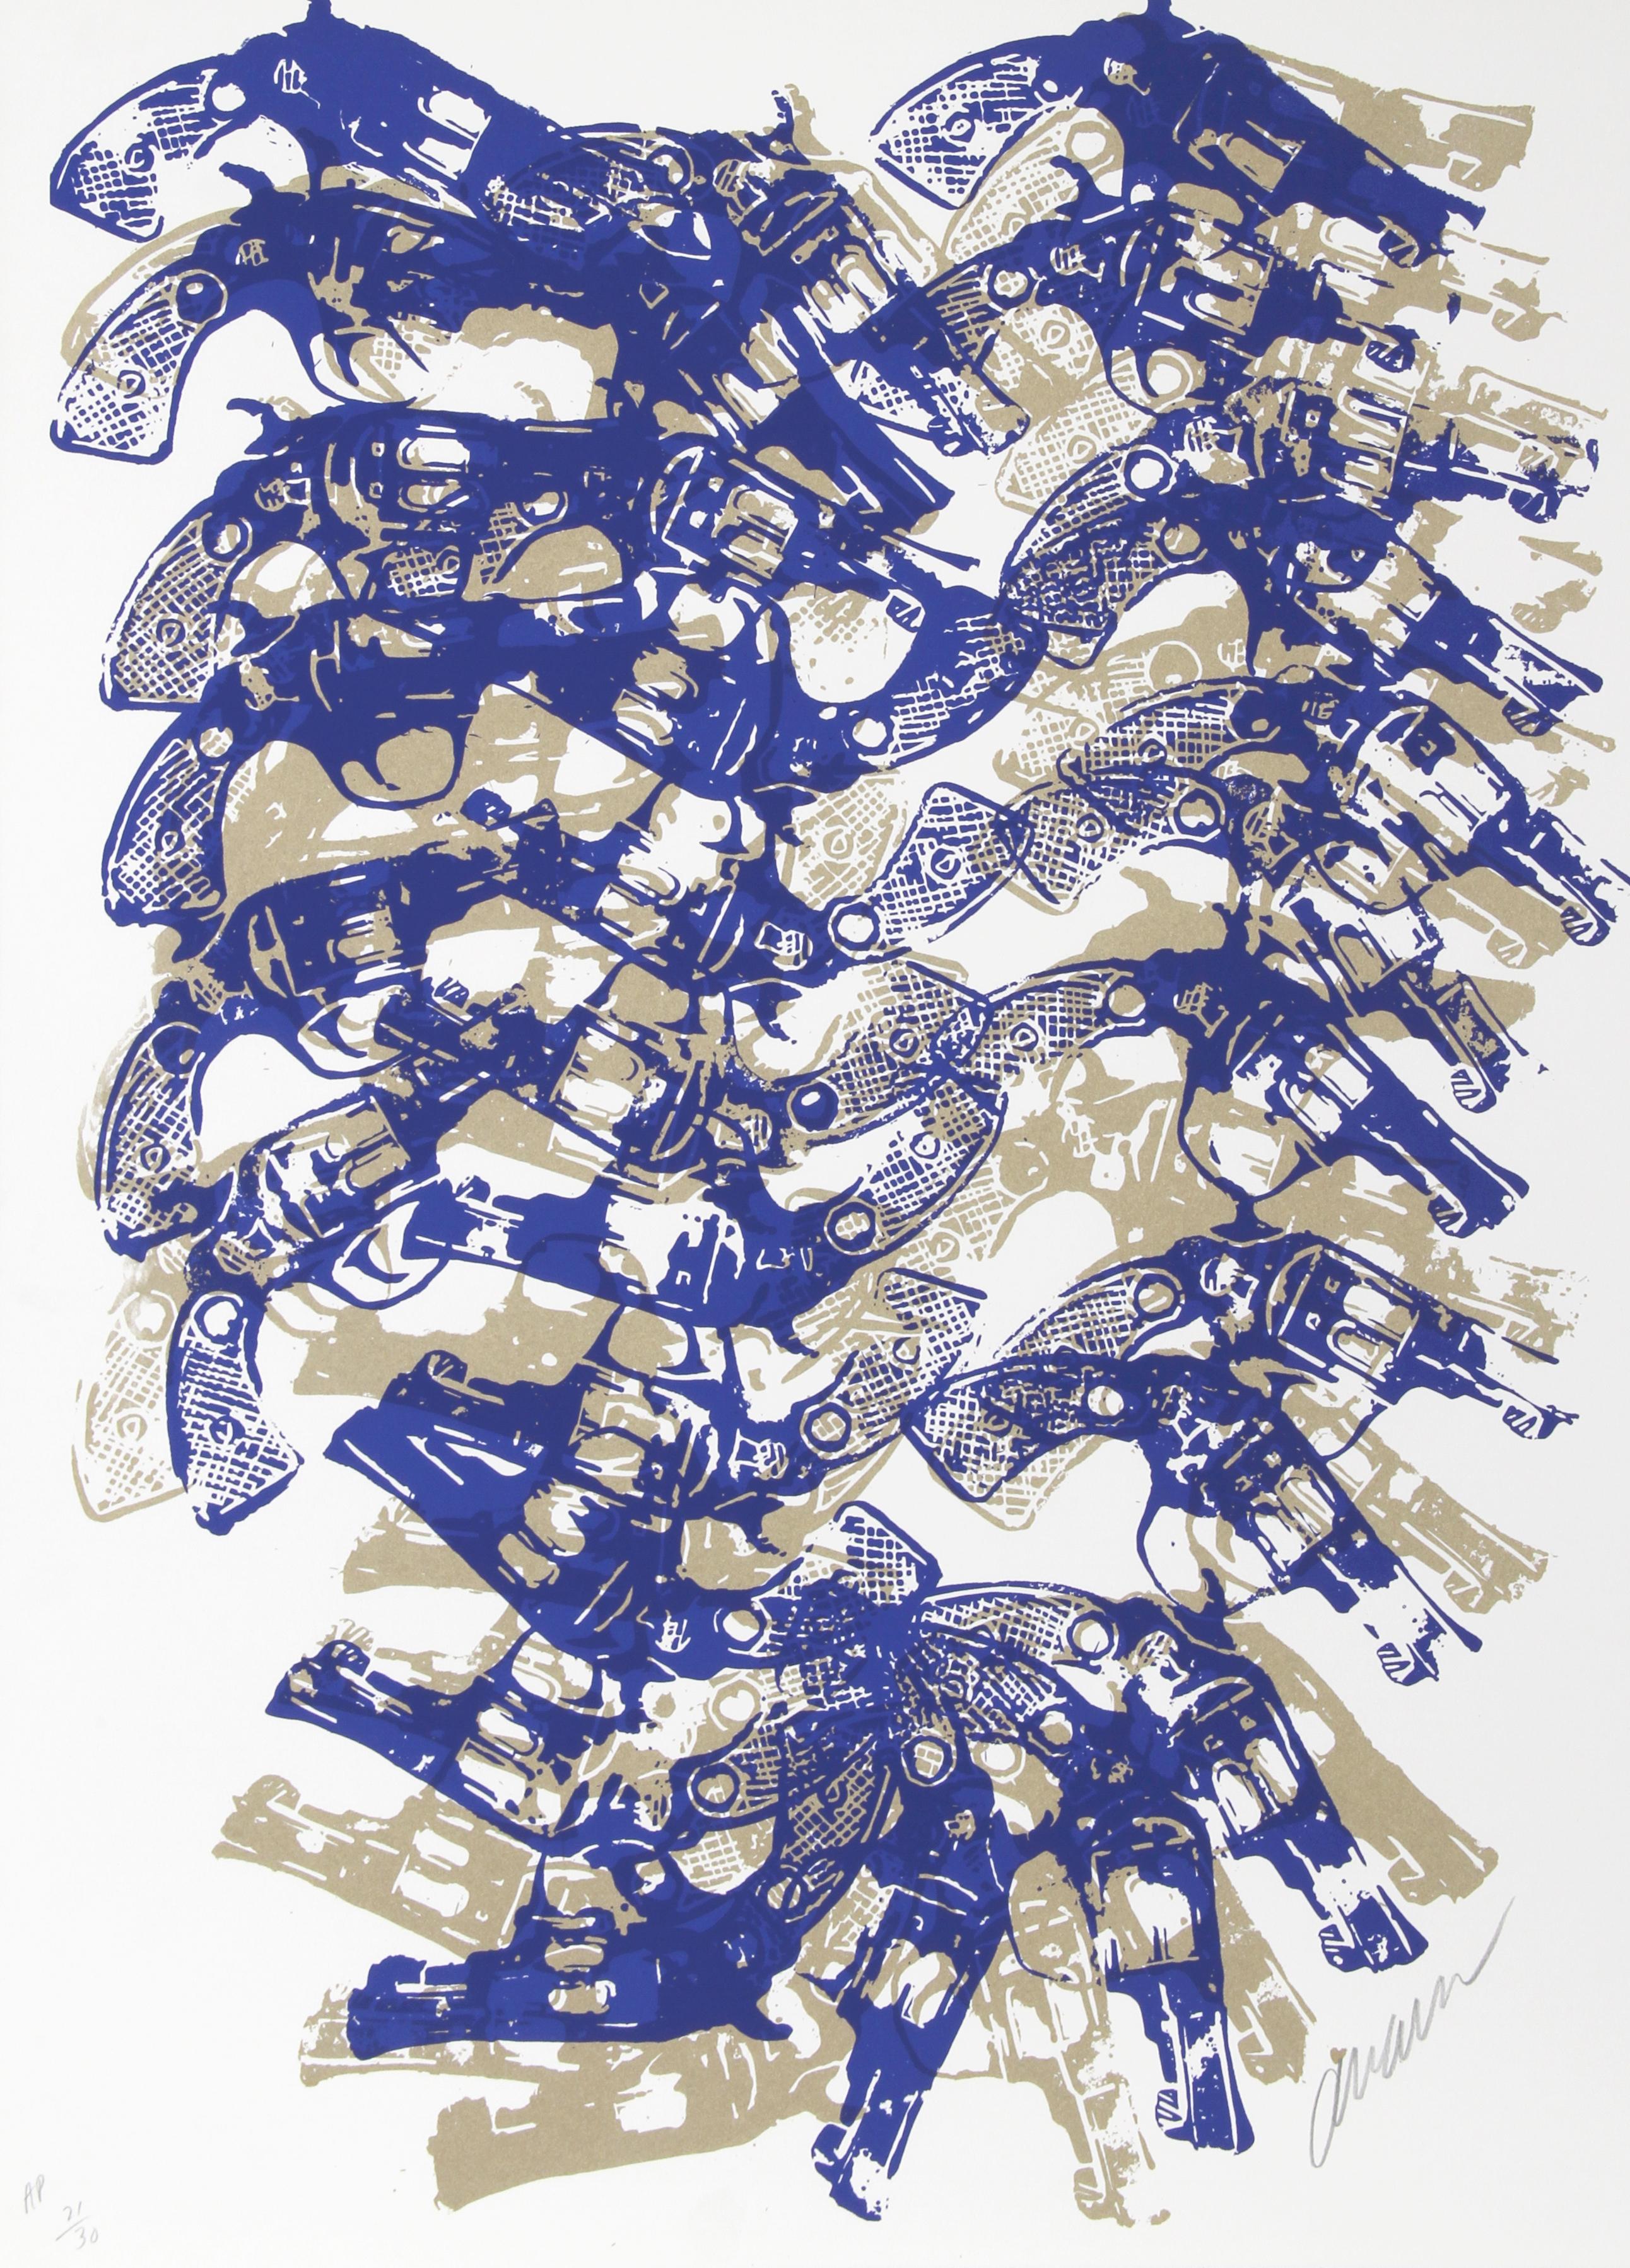 Artist:  Arman, French (1929 - 2005)
Title:  Western Accumulation
Year:  1979
Medium:  Silkscreen on Arches Paper, signed and numbered in pencil
Edition:  150, AP 30
Size:  30 in. x 22 in. (76.2 cm x 55.88 cm)
Frame: 36 x 28 inches